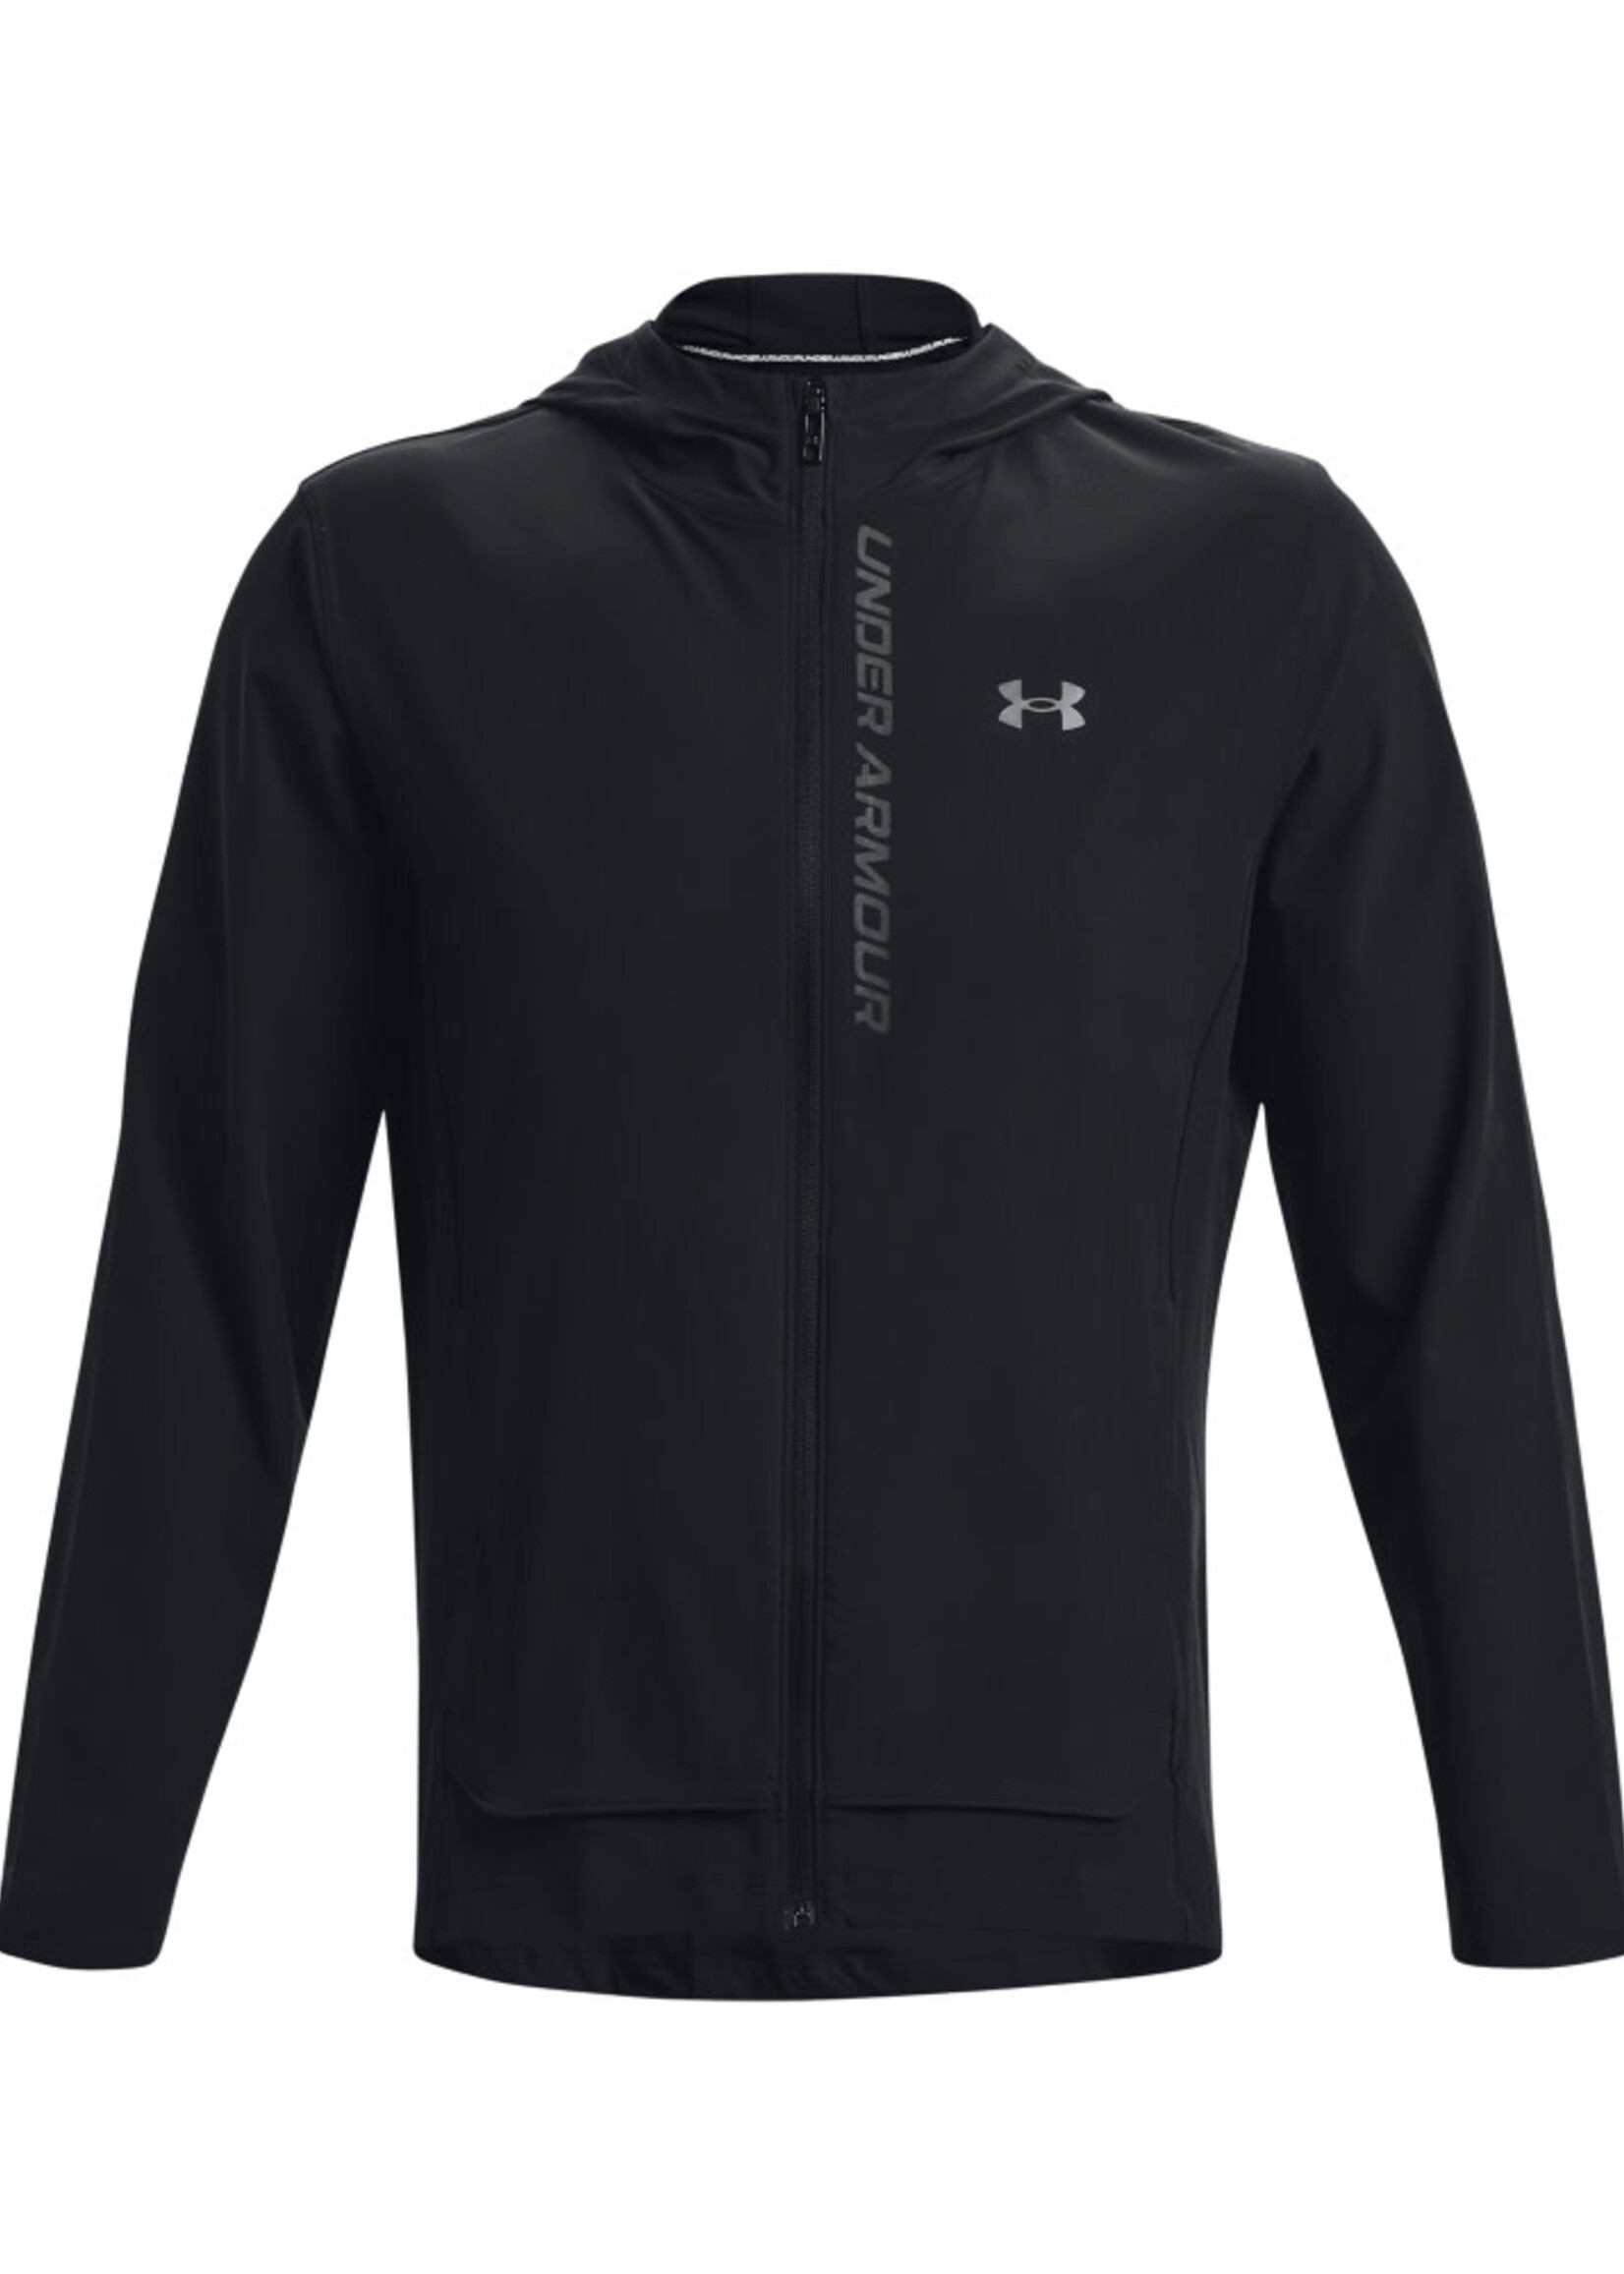 Under Armour Outrun The Storm Jacket-Blk